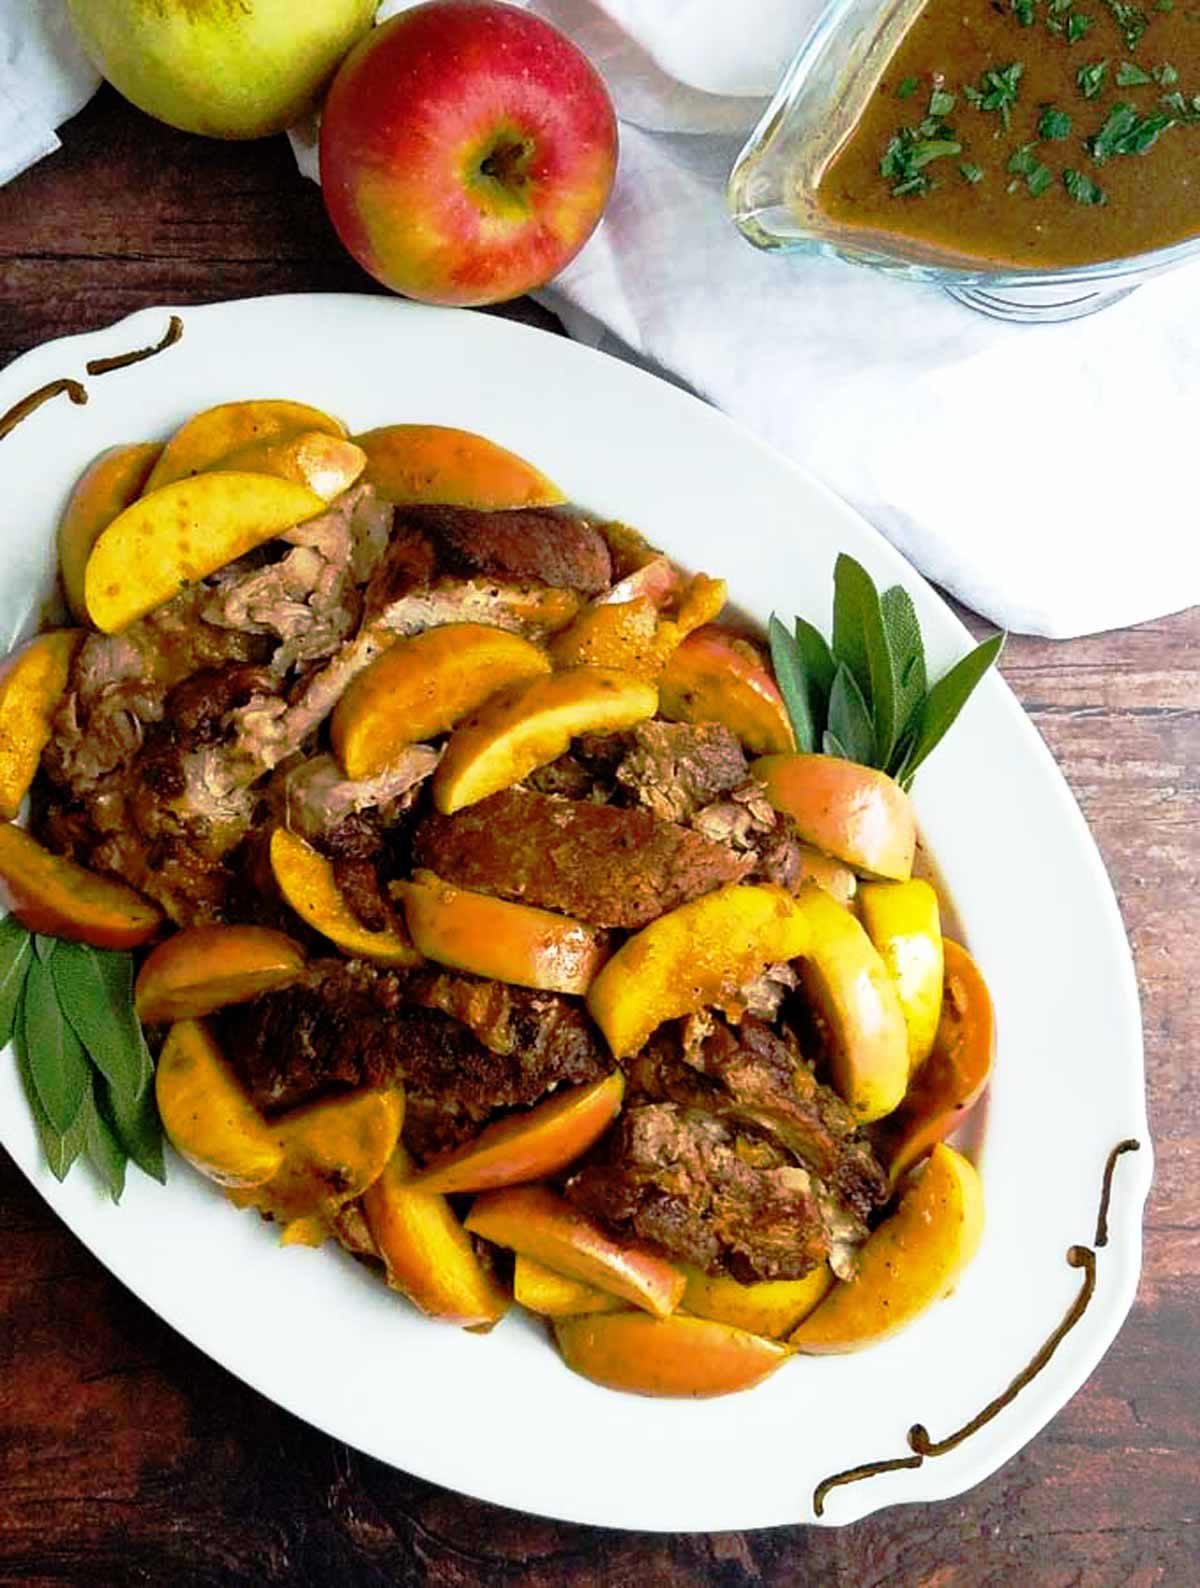 Pork shoulder on a platter with apples and pan sauce.